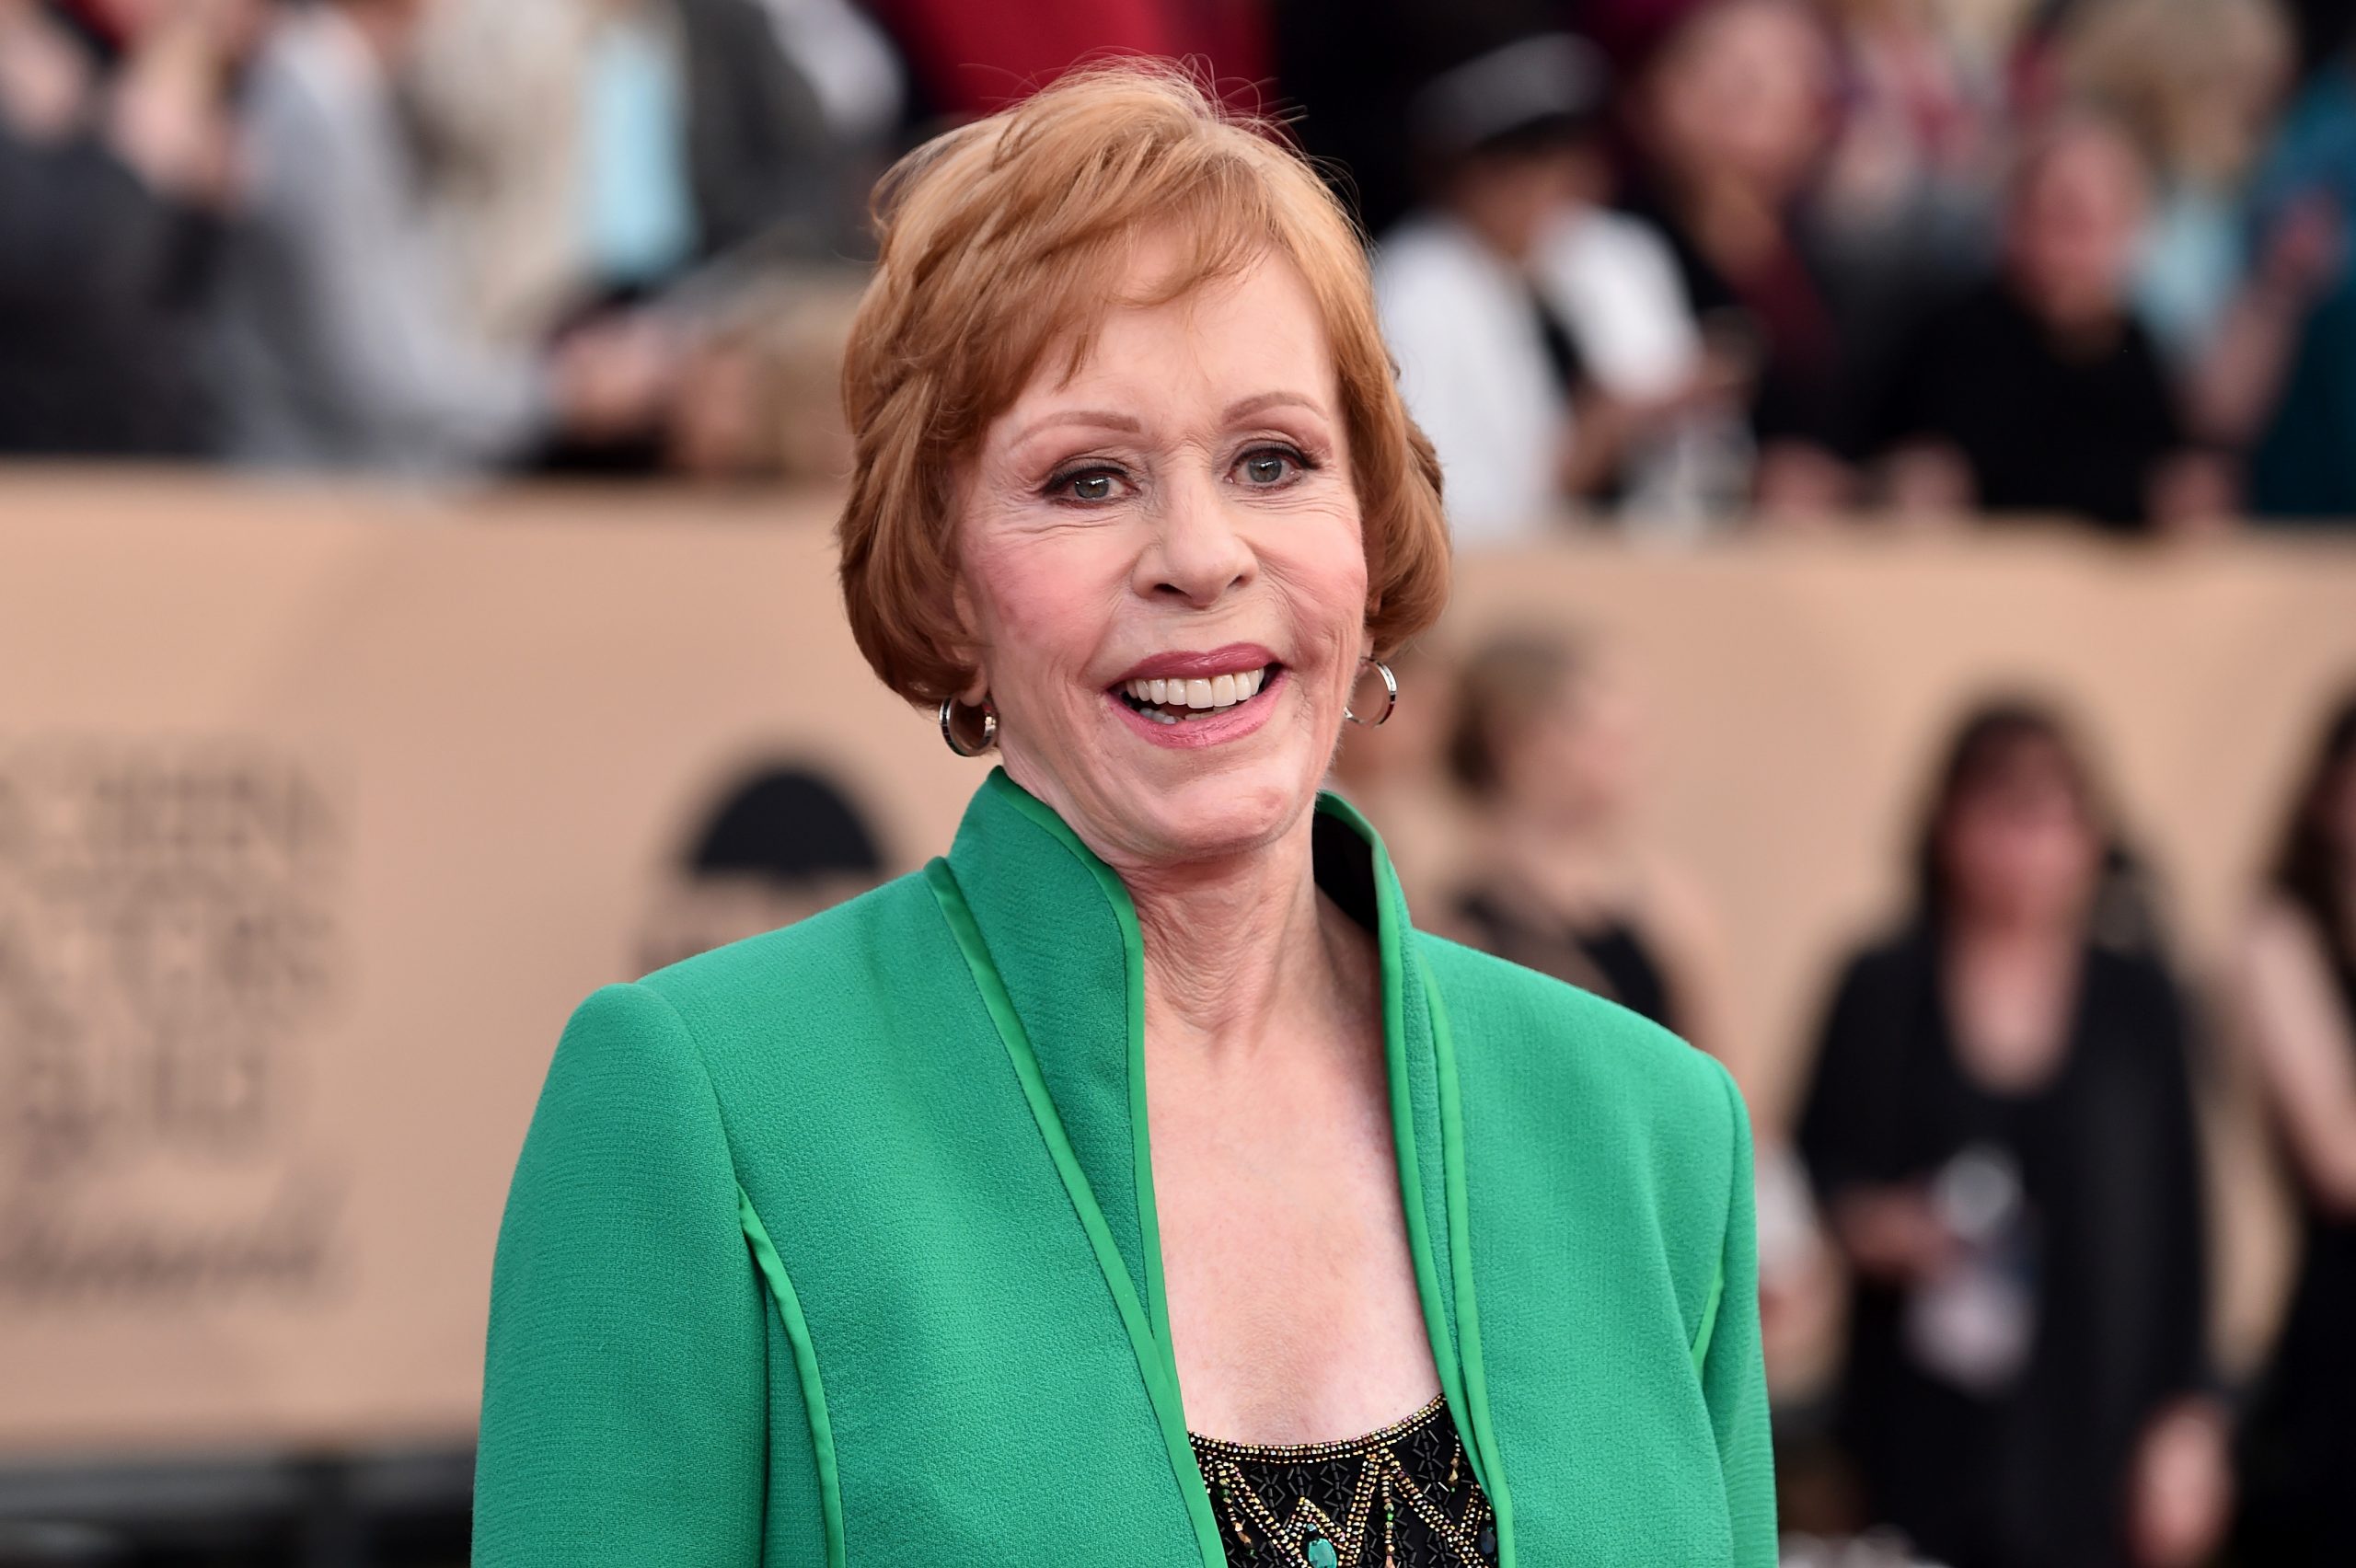 Carol Burnett dons a green blazer and smiles on the red carpet at the Screen Actors Guild Awards